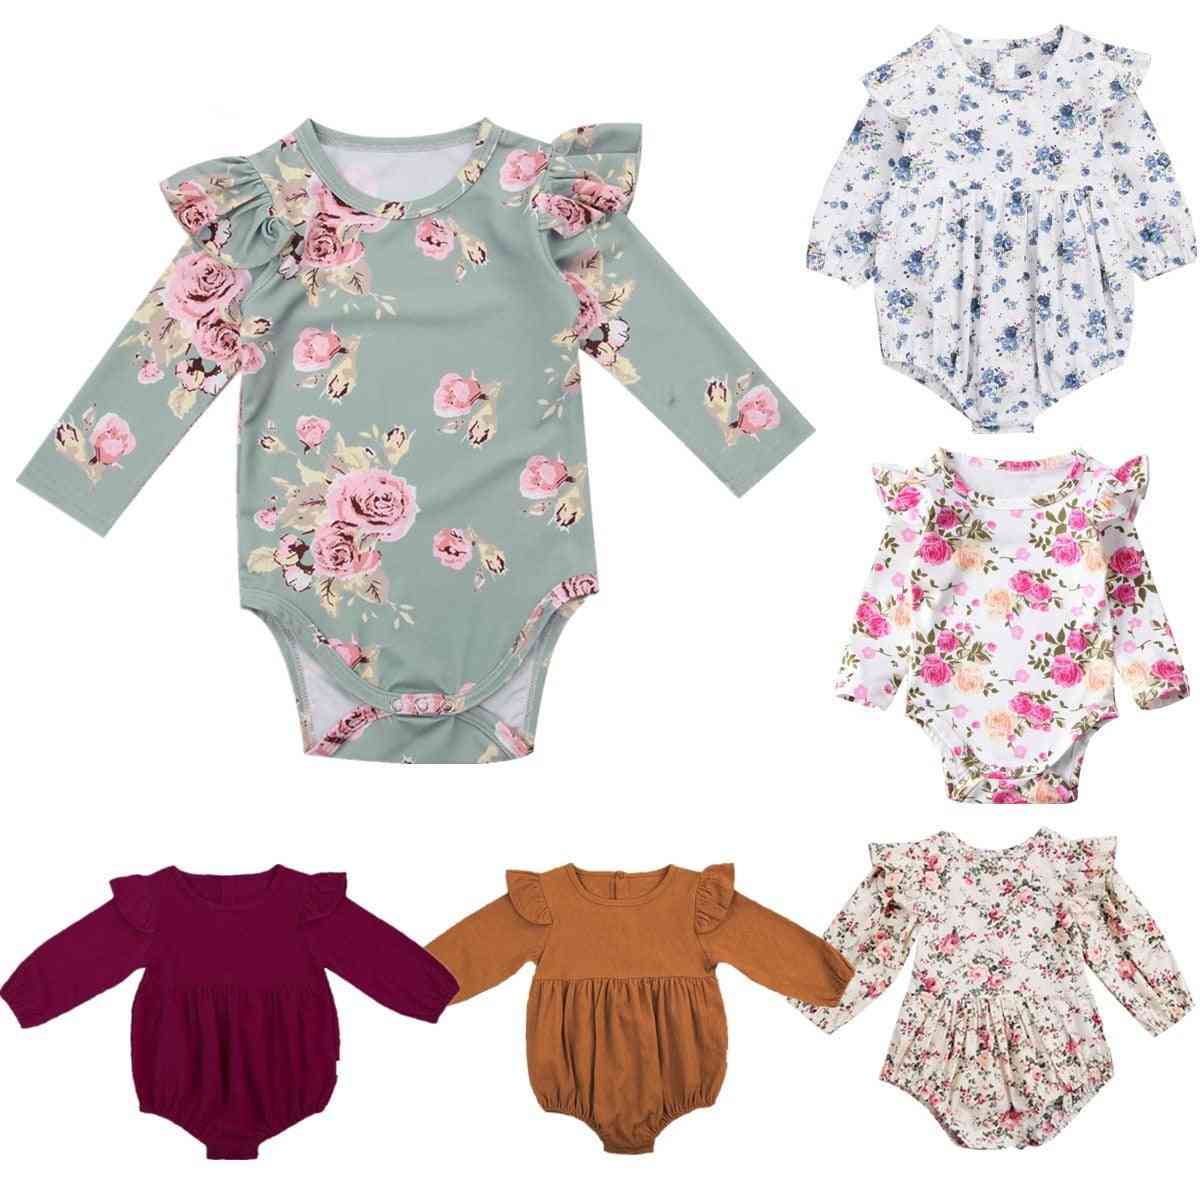 Long Butterfly Sleeve Romper, Outfits Playsuit, Jumpsuit Floral Clothes